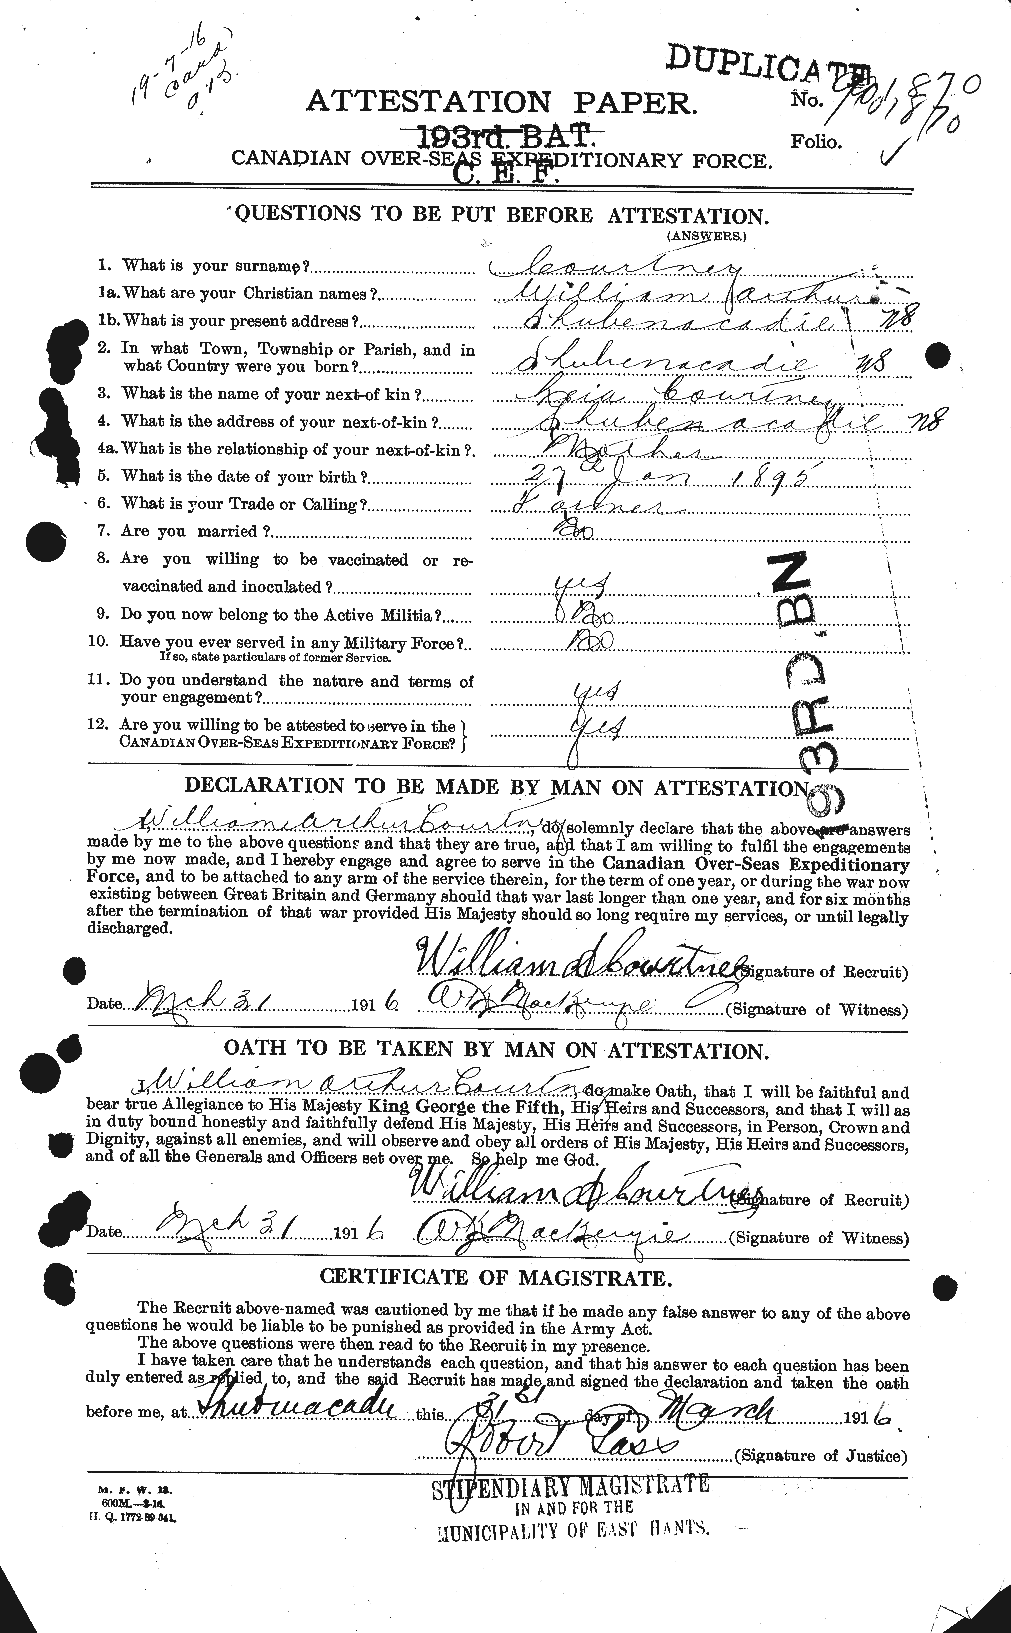 Personnel Records of the First World War - CEF 059088a